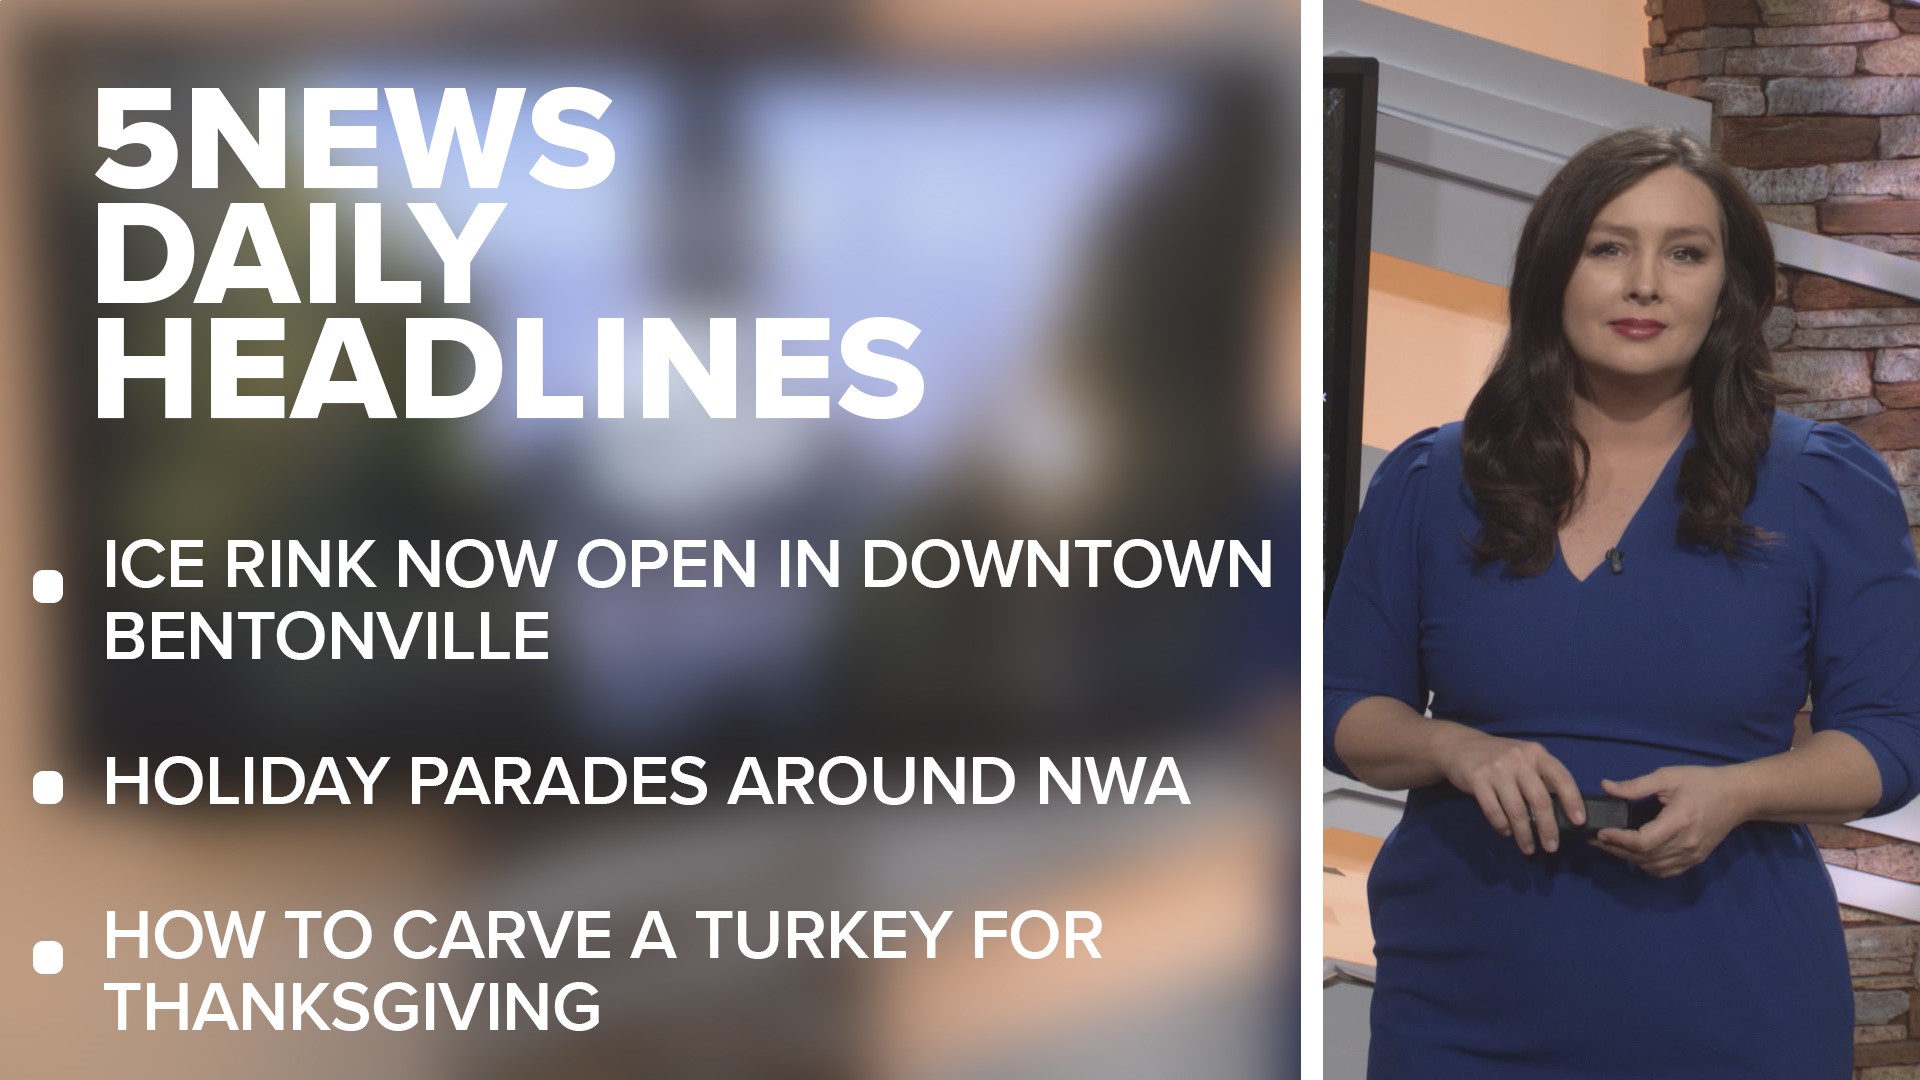 Daily headlines for local news across Northwest Arkansas and the River Valley for Nov. 21, 2022.